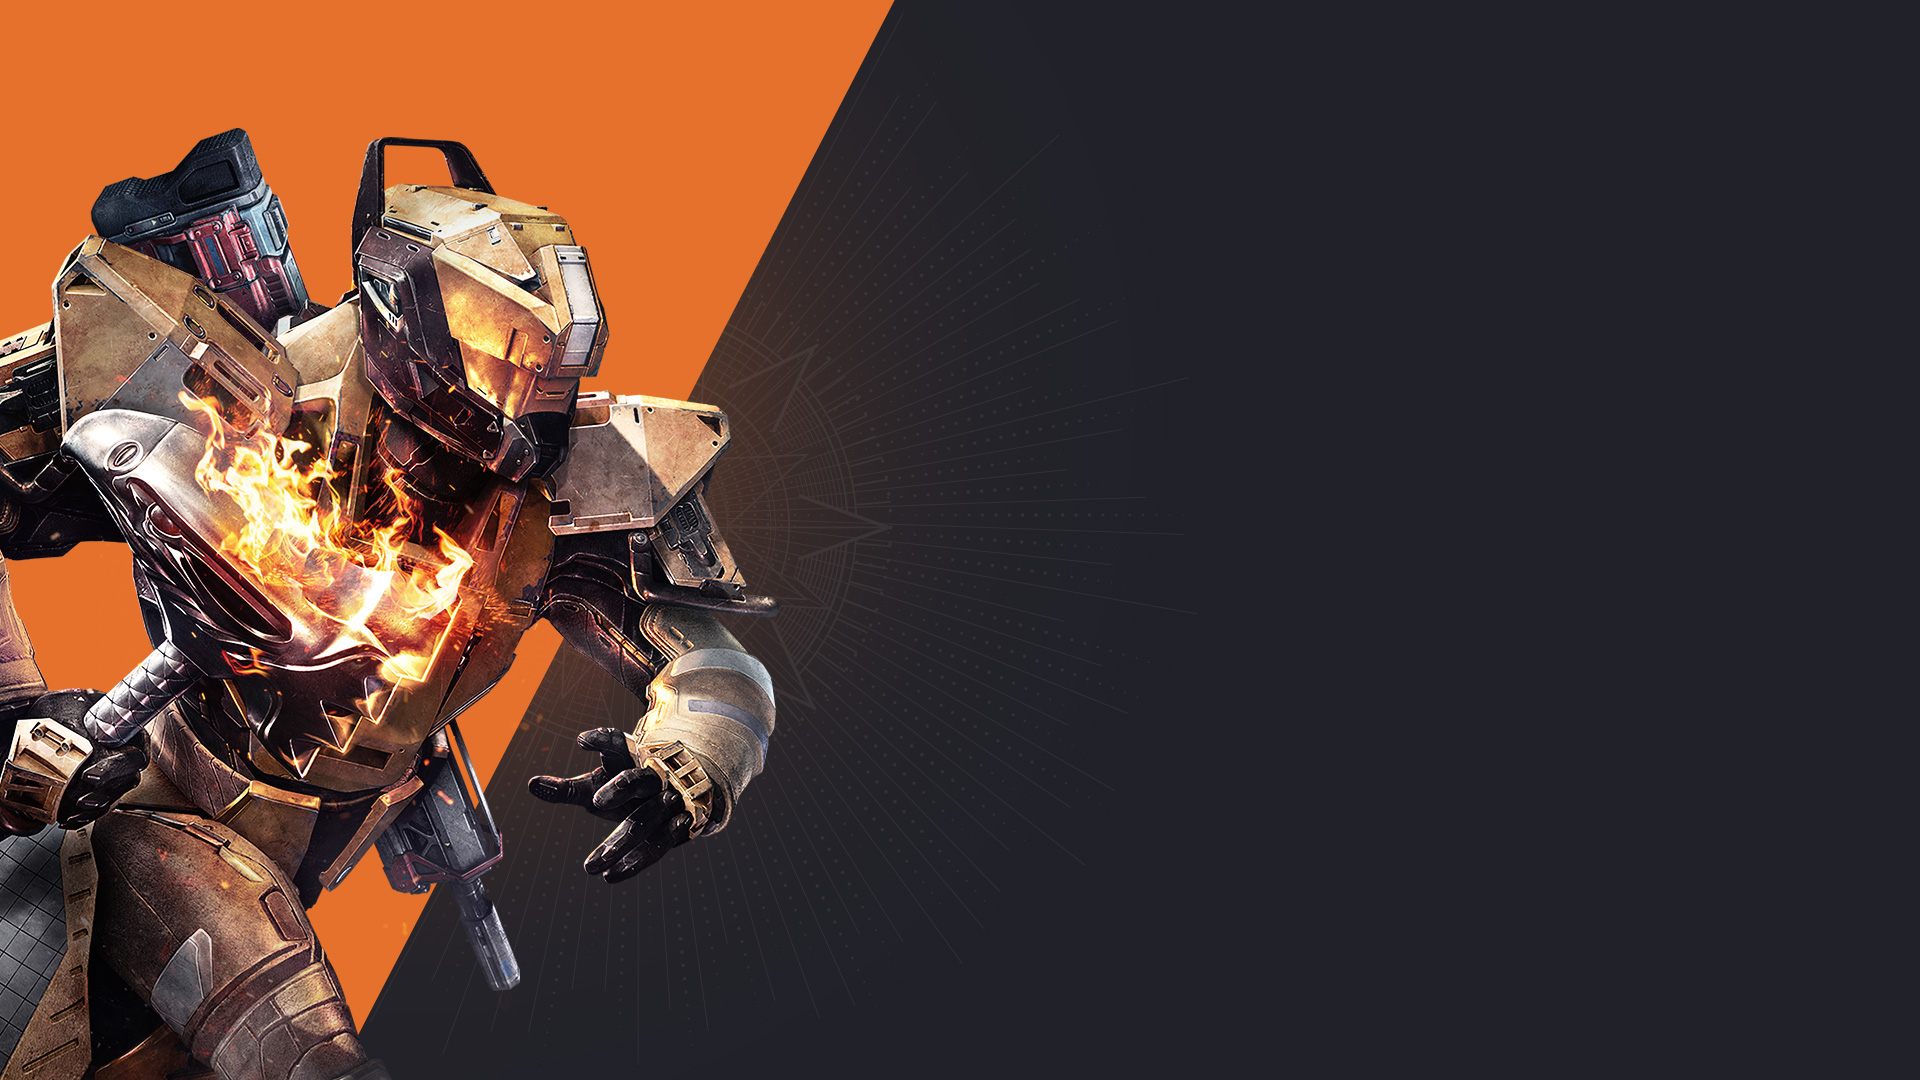 Destiny The Taken King DLC Is Coming September With Exclusive